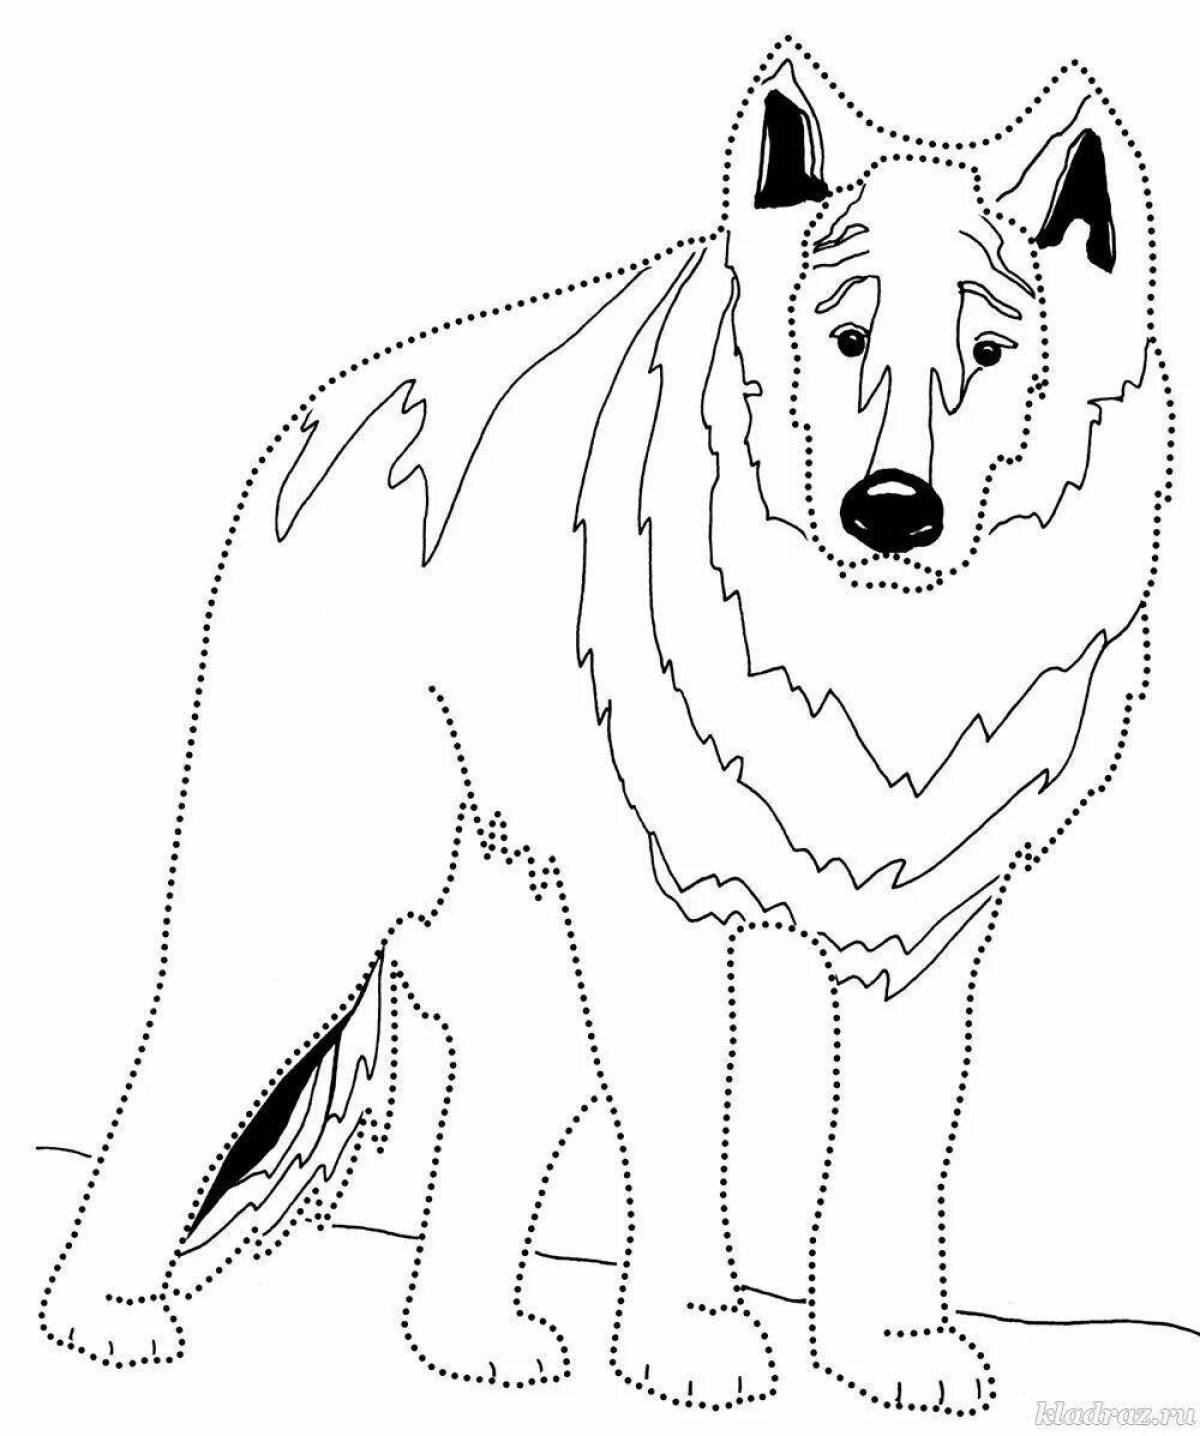 Amazing wolf coloring book for kids 6-7 years old